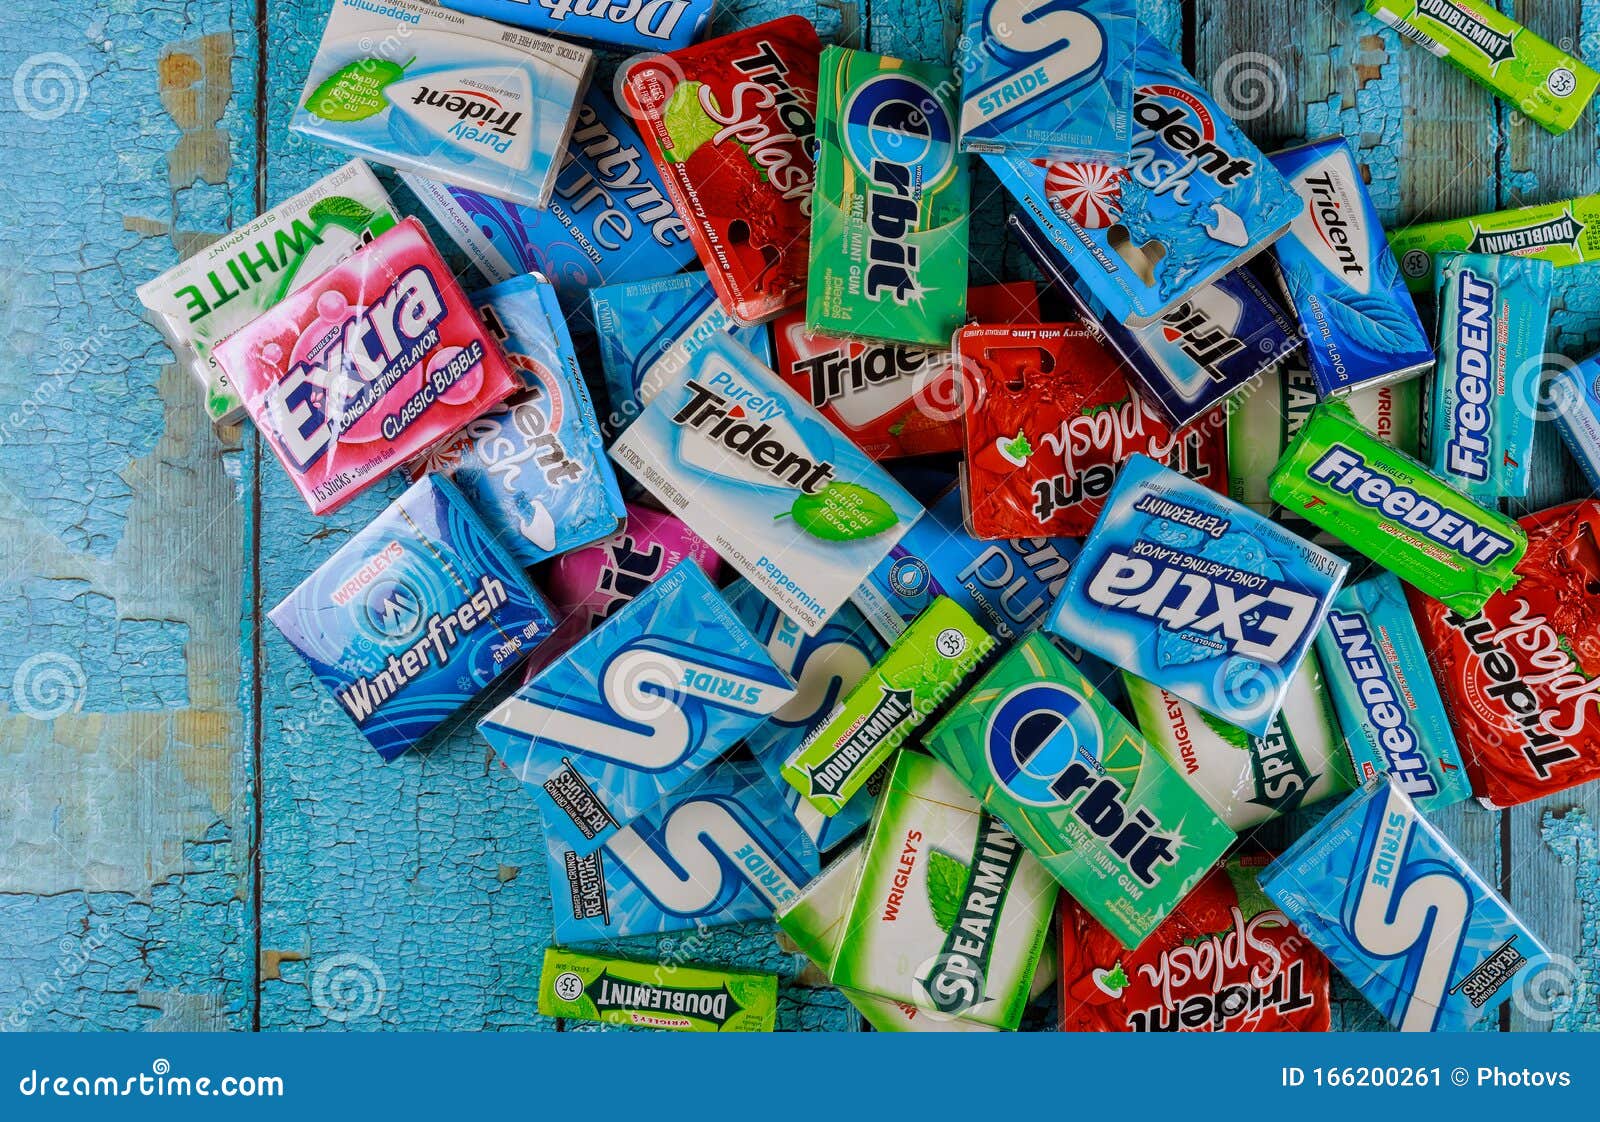 ketting Patois wet Brands Orbit, Extra, Eclipse, Freedent, Wrigley, Spearmint. Ttident,  Stride, Various Brand Chewing Gum Editorial Photo - Image of chewing,  doublemint: 166200261